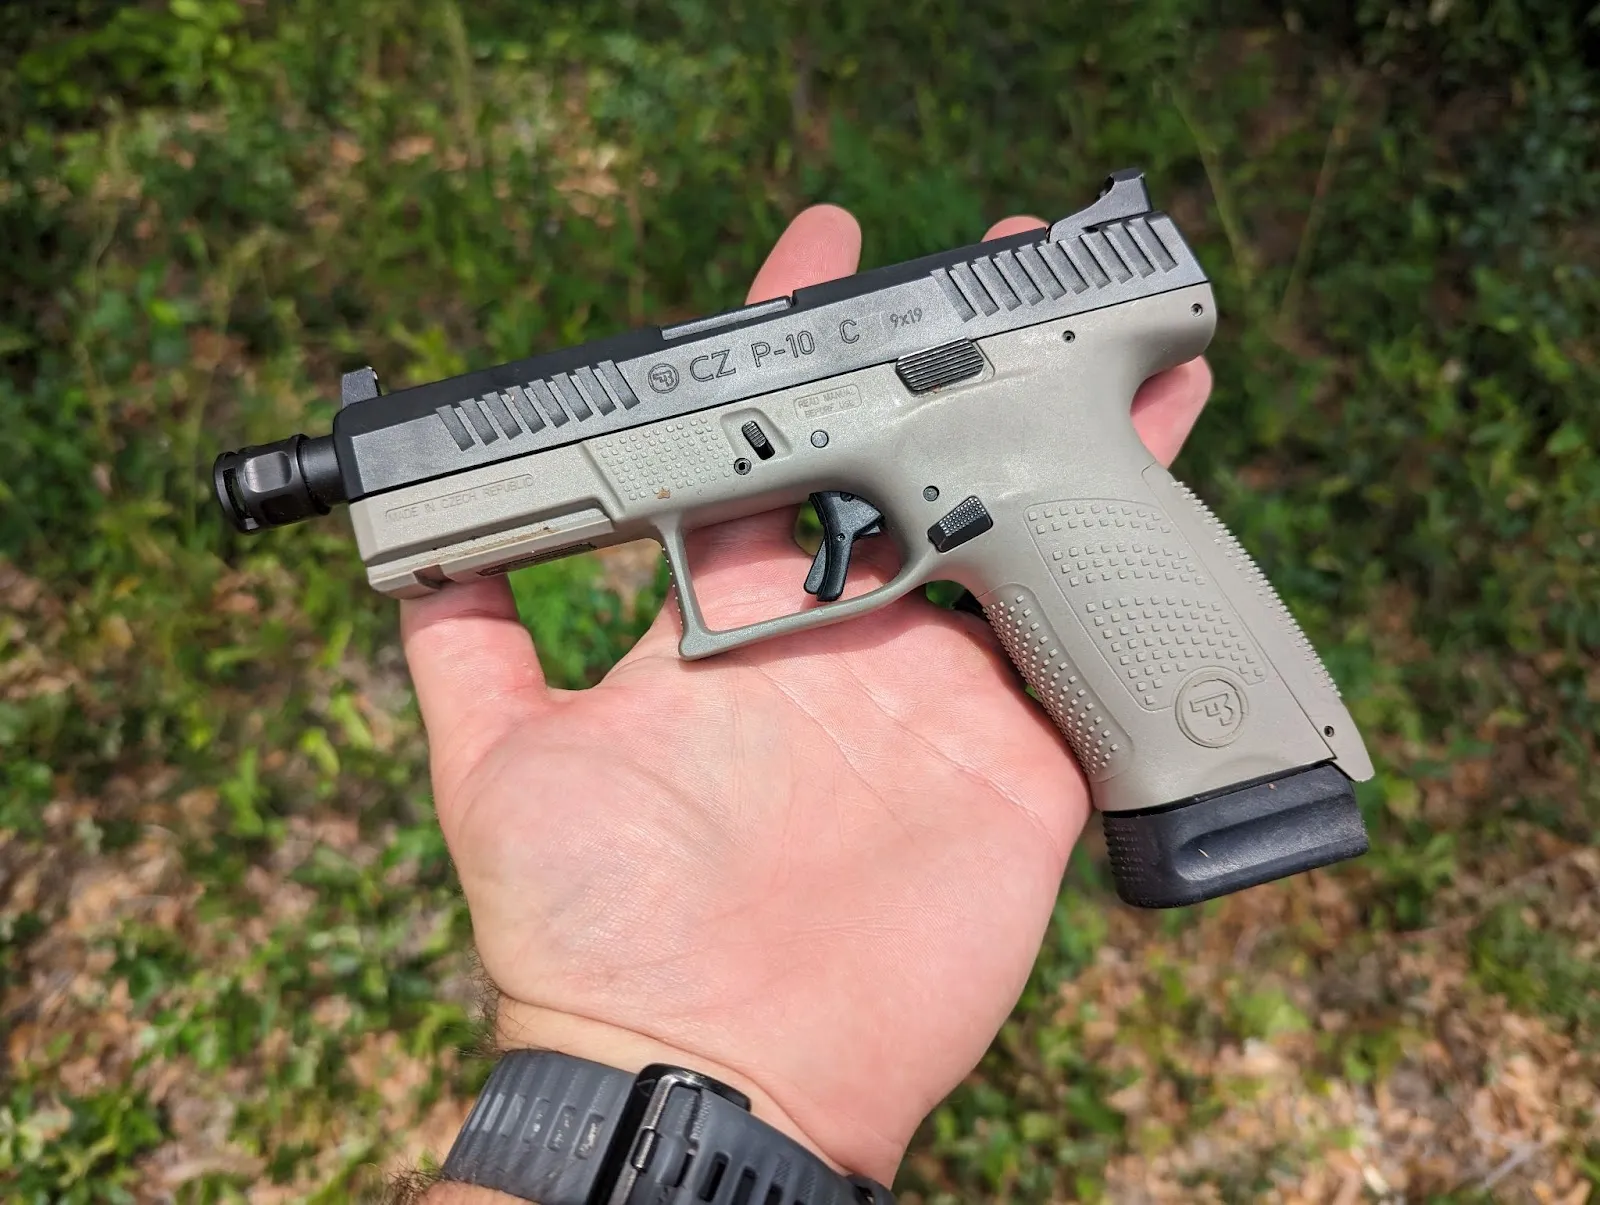 Cz p10c review hands on